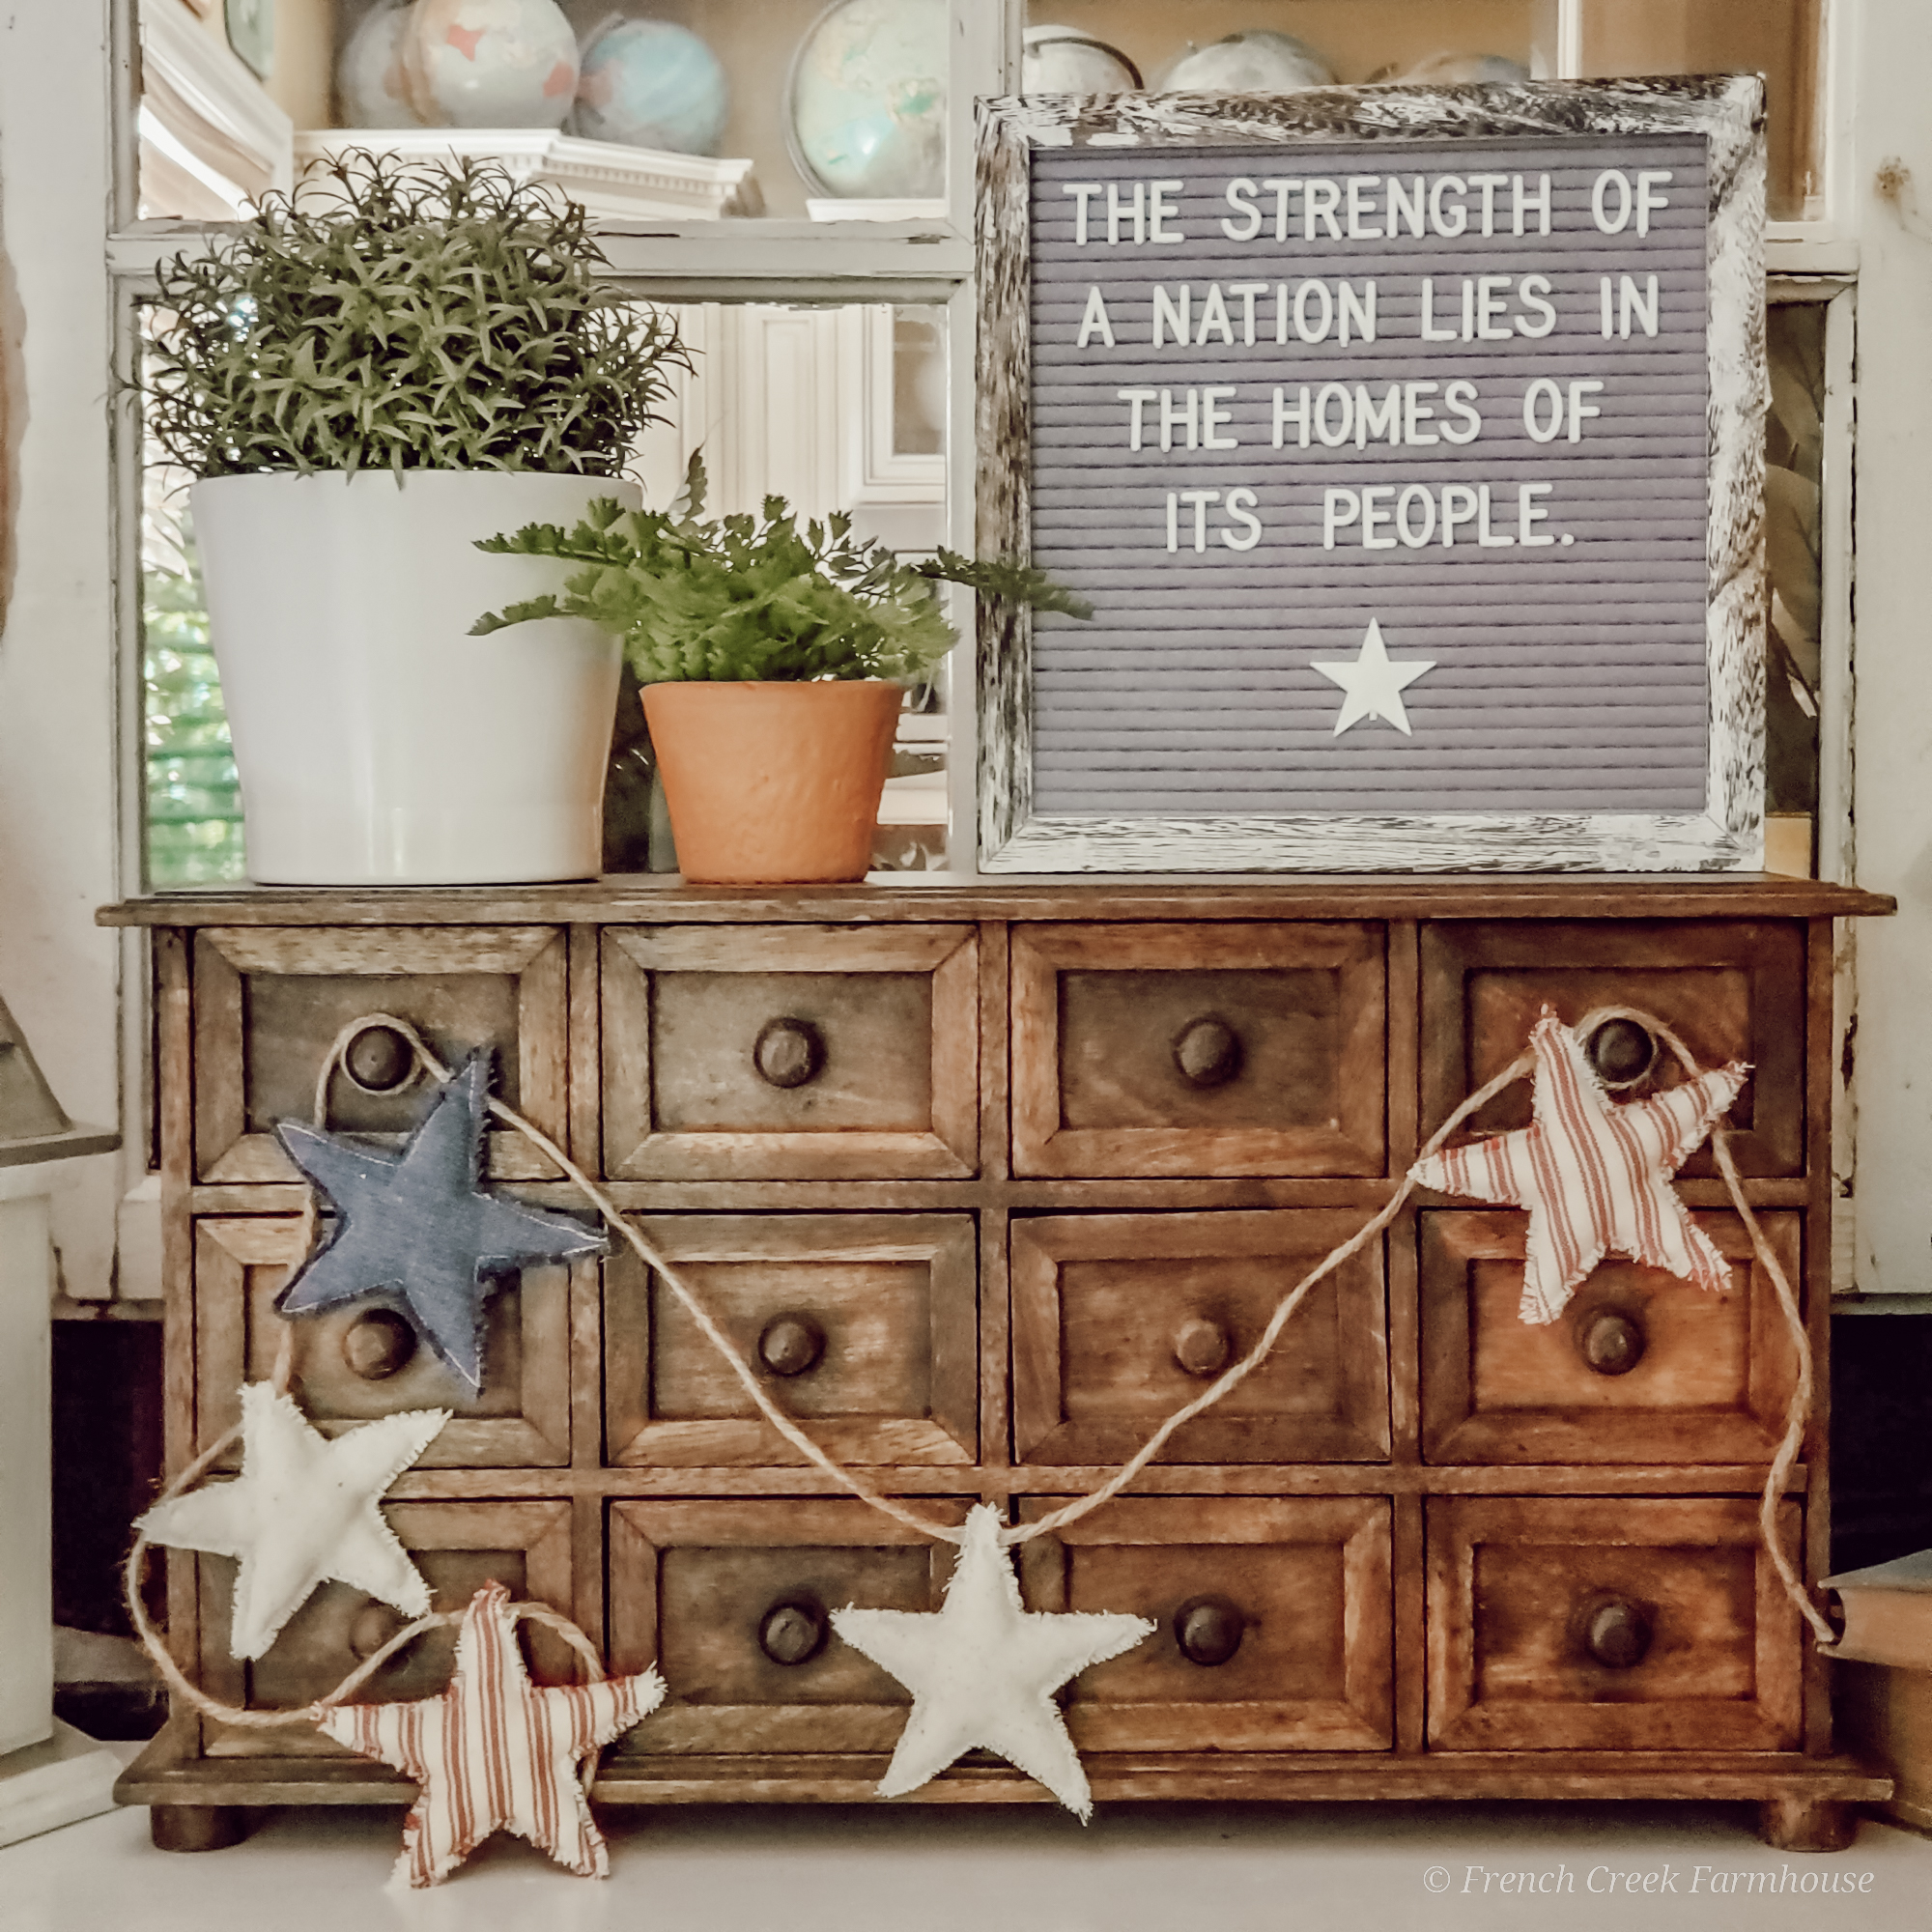 This garland looks great in your patriotic farmhouse vignettes!